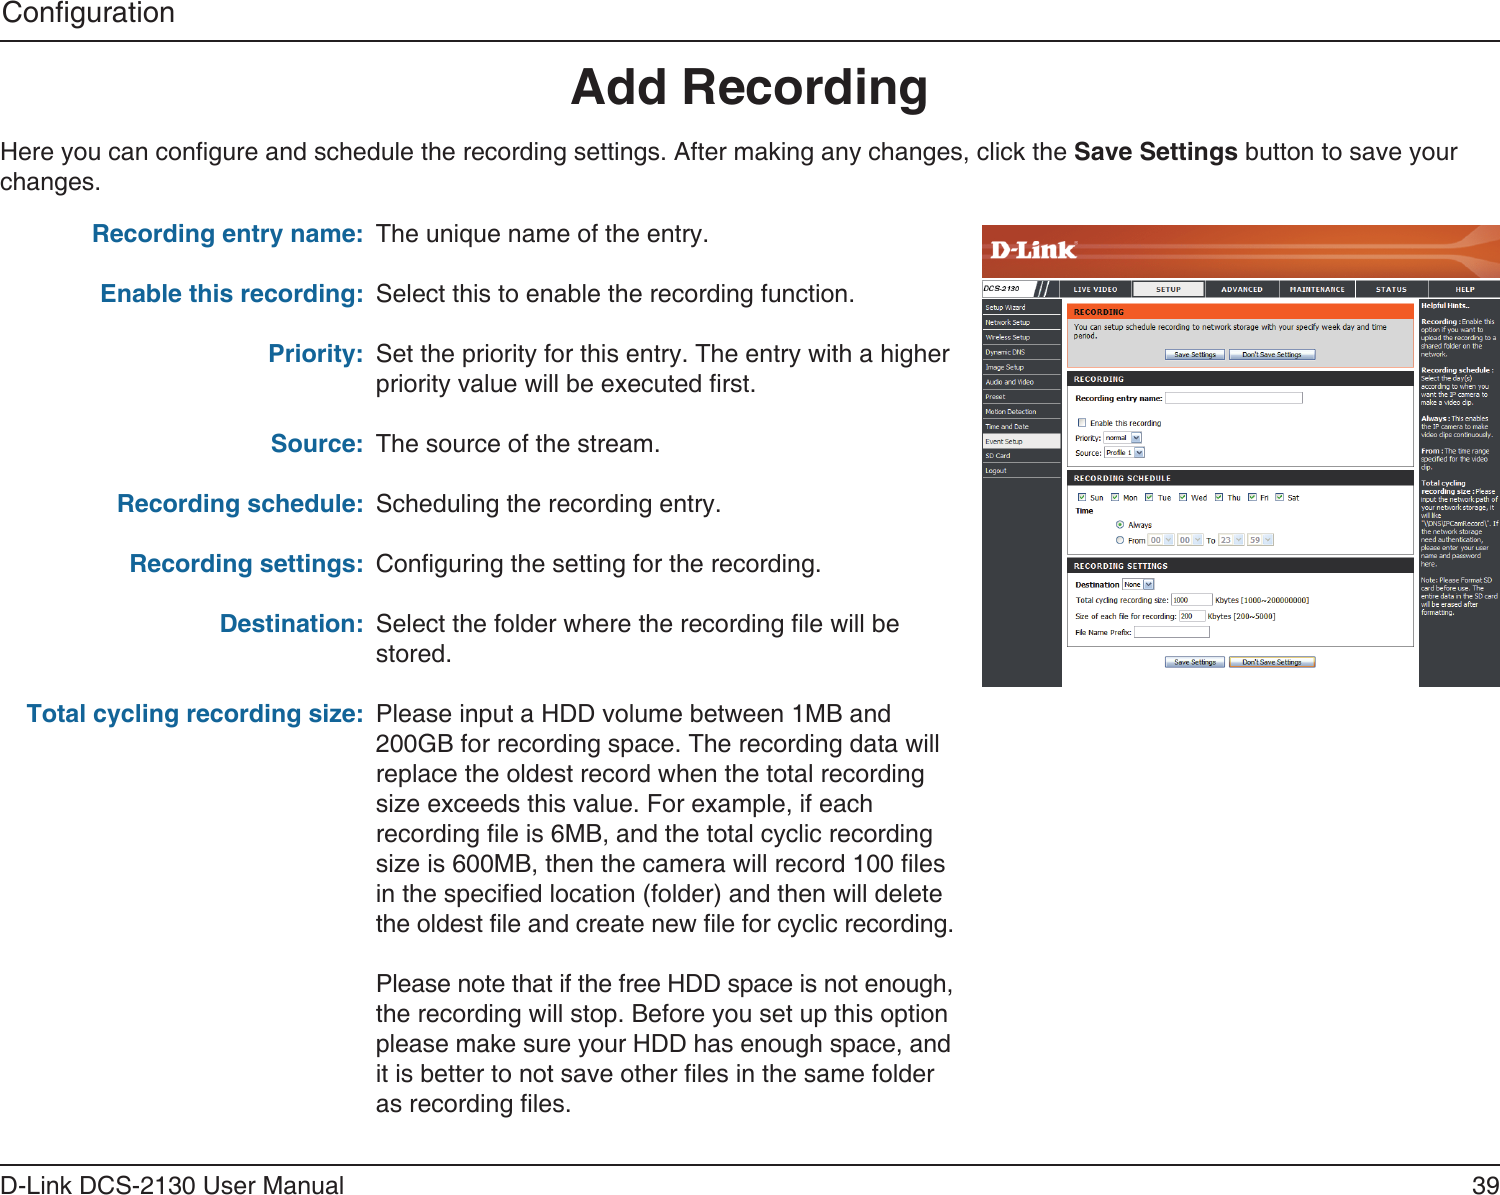 39D-Link DCS-2130 User ManualCongurationAdd RecordingRecording entry name:Enable this recording:Priority:Source:Recording schedule:Recording settings:Destination:Total cycling recording size:The unique name of the entry.Select this to enable the recording function.Set the priority for this entry. The entry with a higher priority value will be executed rst.The source of the stream.Scheduling the recording entry.Conguring the setting for the recording.Select the folder where the recording le will be stored.Please input a HDD volume between 1MB and 200GB for recording space. The recording data will replace the oldest record when the total recording size exceeds this value. For example, if each recording le is 6MB, and the total cyclic recording size is 600MB, then the camera will record 100 les  in the specied location (folder) and then will delete  the oldest le and create new le for cyclic recording.Please note that if the free HDD space is not enough, the recording will stop. Before you set up this option please make sure your HDD has enough space, and  it is better to not save other les in the same folder as recording les. Here you can congure and schedule the recording settings. After making any changes, click the Save Settings button to save your changes.